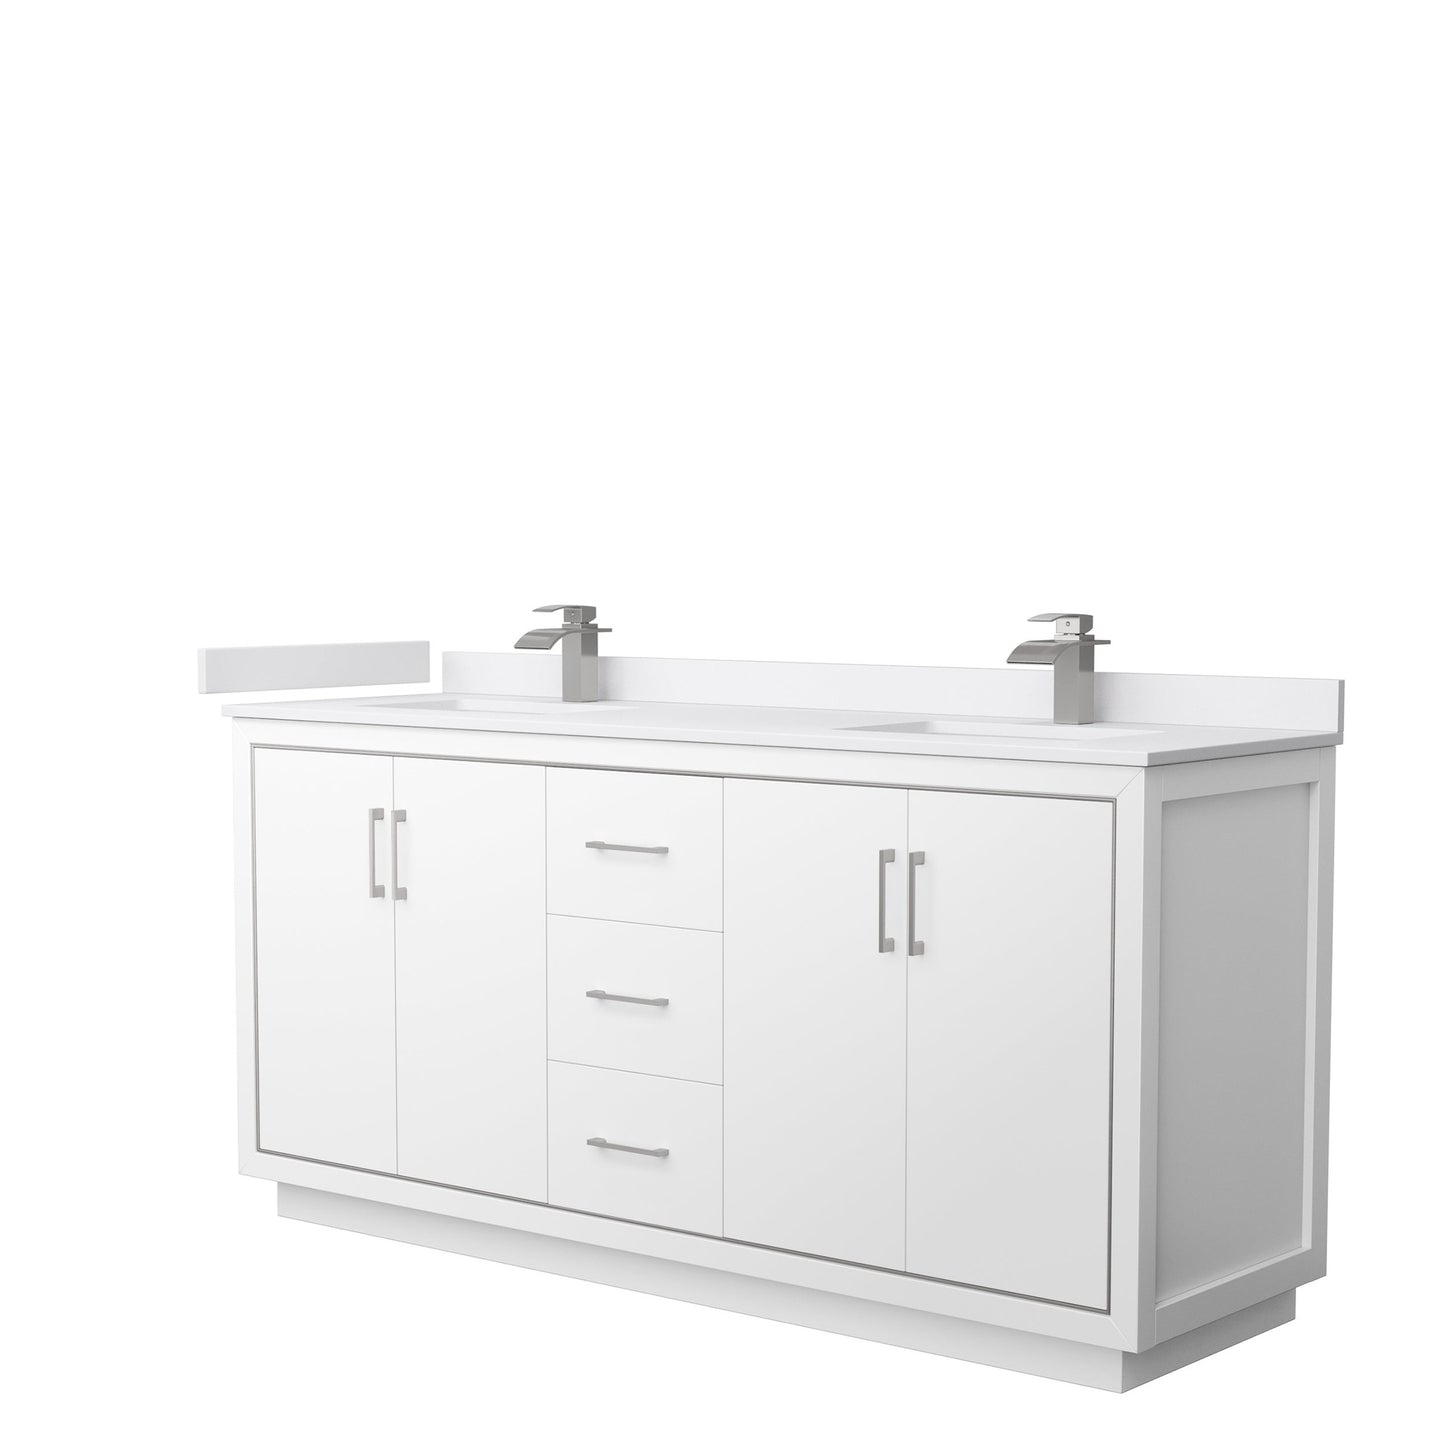 Wyndham Collection Icon 72" Double Bathroom Vanity in White, White Cultured Marble Countertop, Undermount Square Sinks, Brushed Nickel Trim